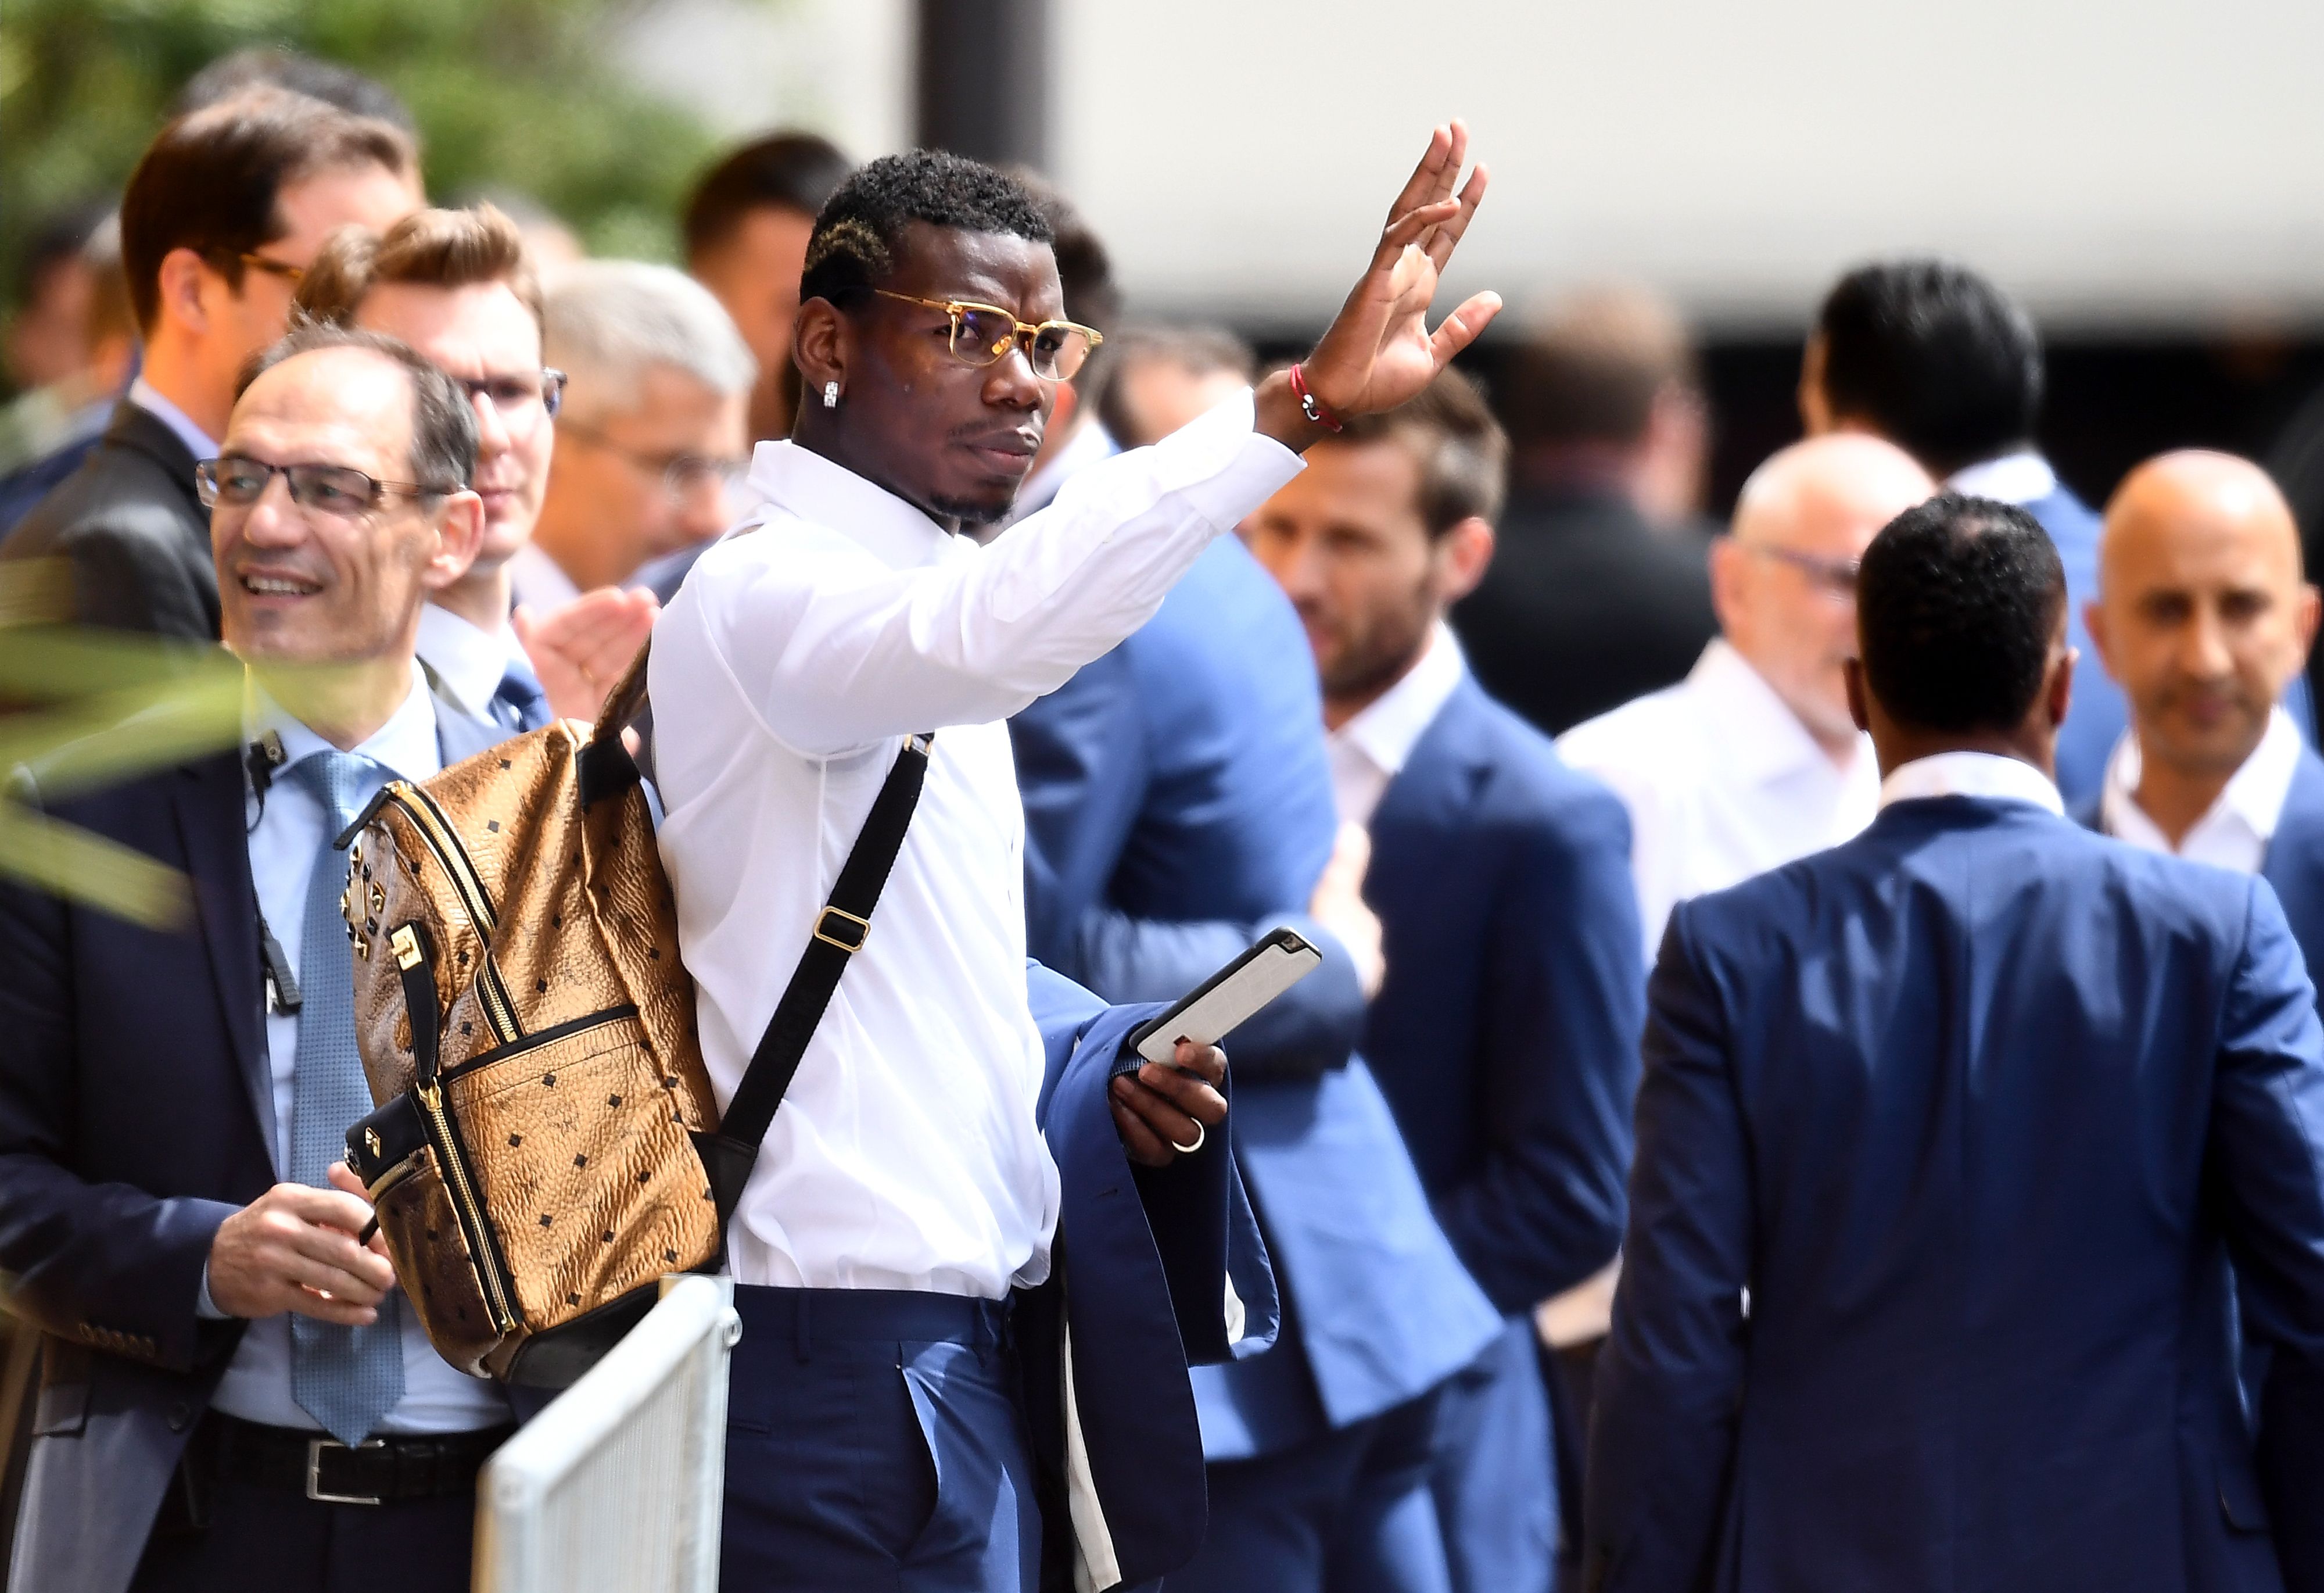 France's midfielder Paul Pogba waves at supporters as France's national football team players leave their hotel on their way to the Elysee Palace in Paris on July 11, 2016, a day after Portugal beat France in the Euro 2016 final football match. / AFP / FRANCK FIFE        (Photo credit should read FRANCK FIFE/AFP/Getty Images)